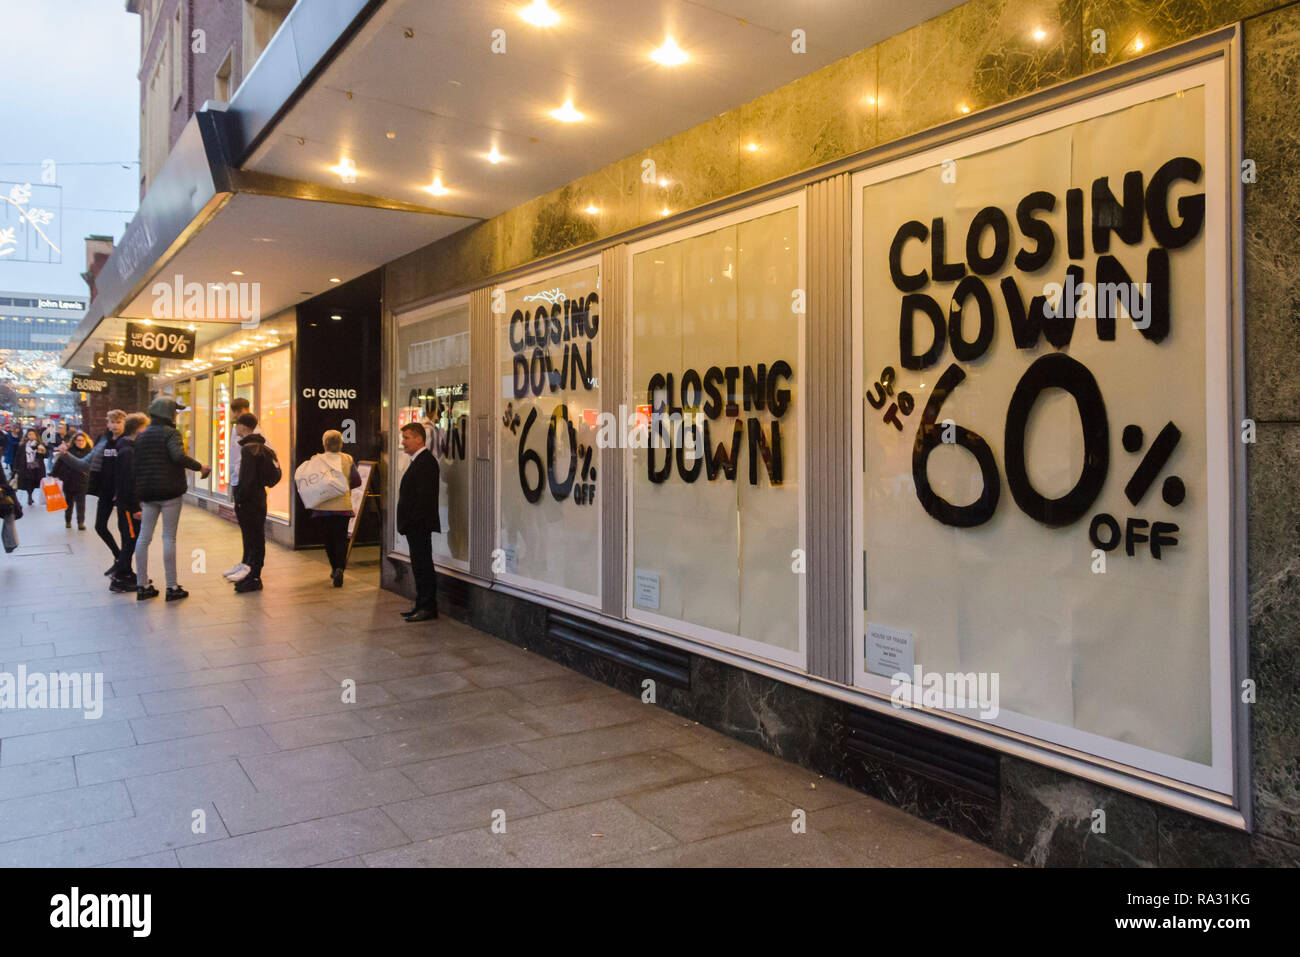 Exeter, Devon, UK. 30th Dec, 2018. The House of Fraser department store at Exeter in Devon, which is closing down in January 2018. The store is displaying closing down signs and has a sale with 60% off. Picture Credit: Graham Hunt/Alamy Live News Stock Photo